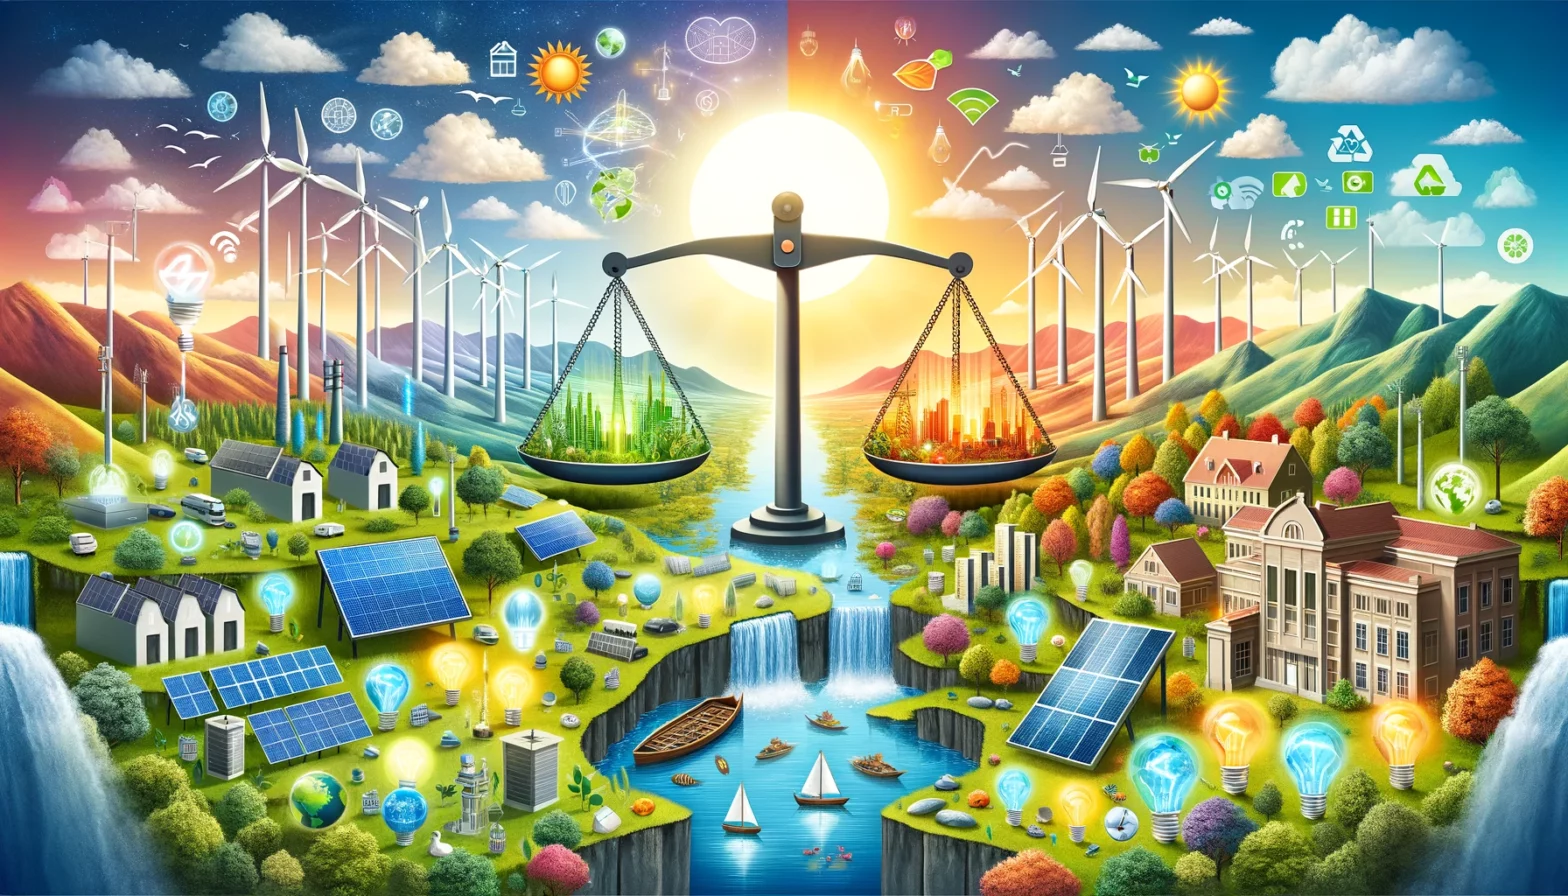 An illustration showing the comparison between renewable and sustainable energy, featuring icons of solar panels, wind turbines, and energy-efficient buildings.